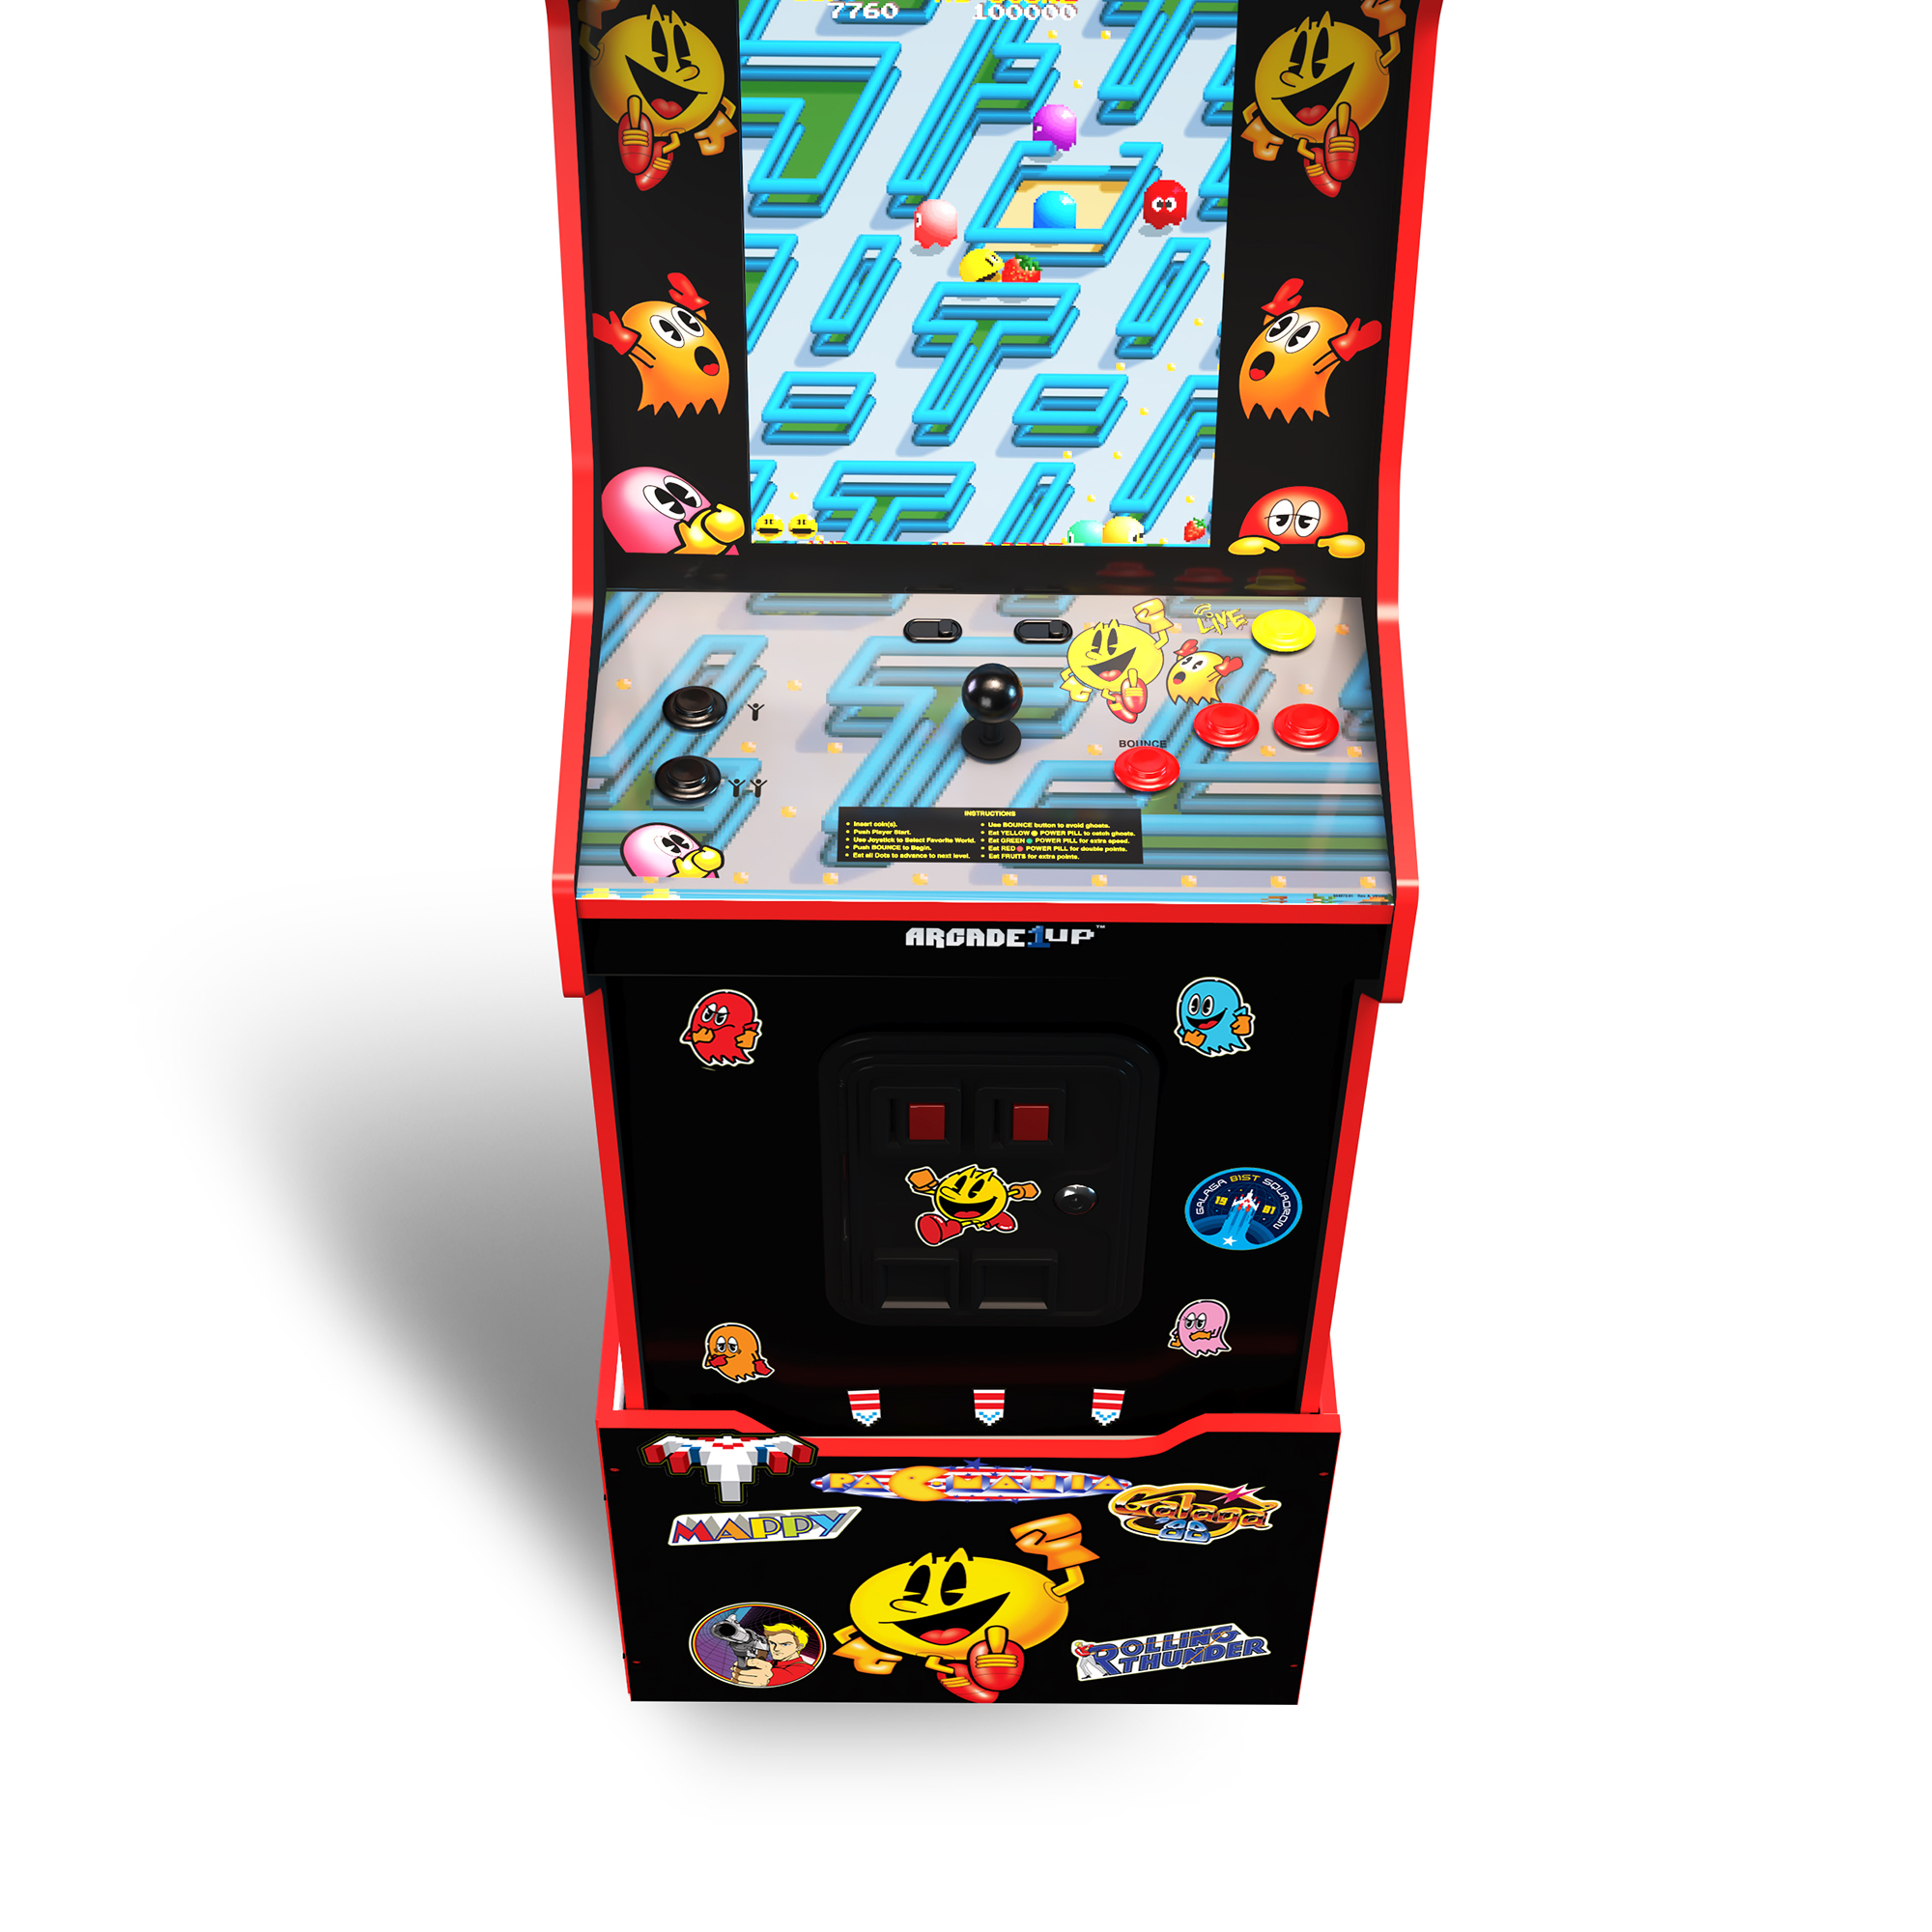 Arcade1UP - 14 Games in 1, PAC-MAN Customizable Video Game Arcade Featuring PAC-MANIA and includes 100 Bonus Stickers - image 5 of 17